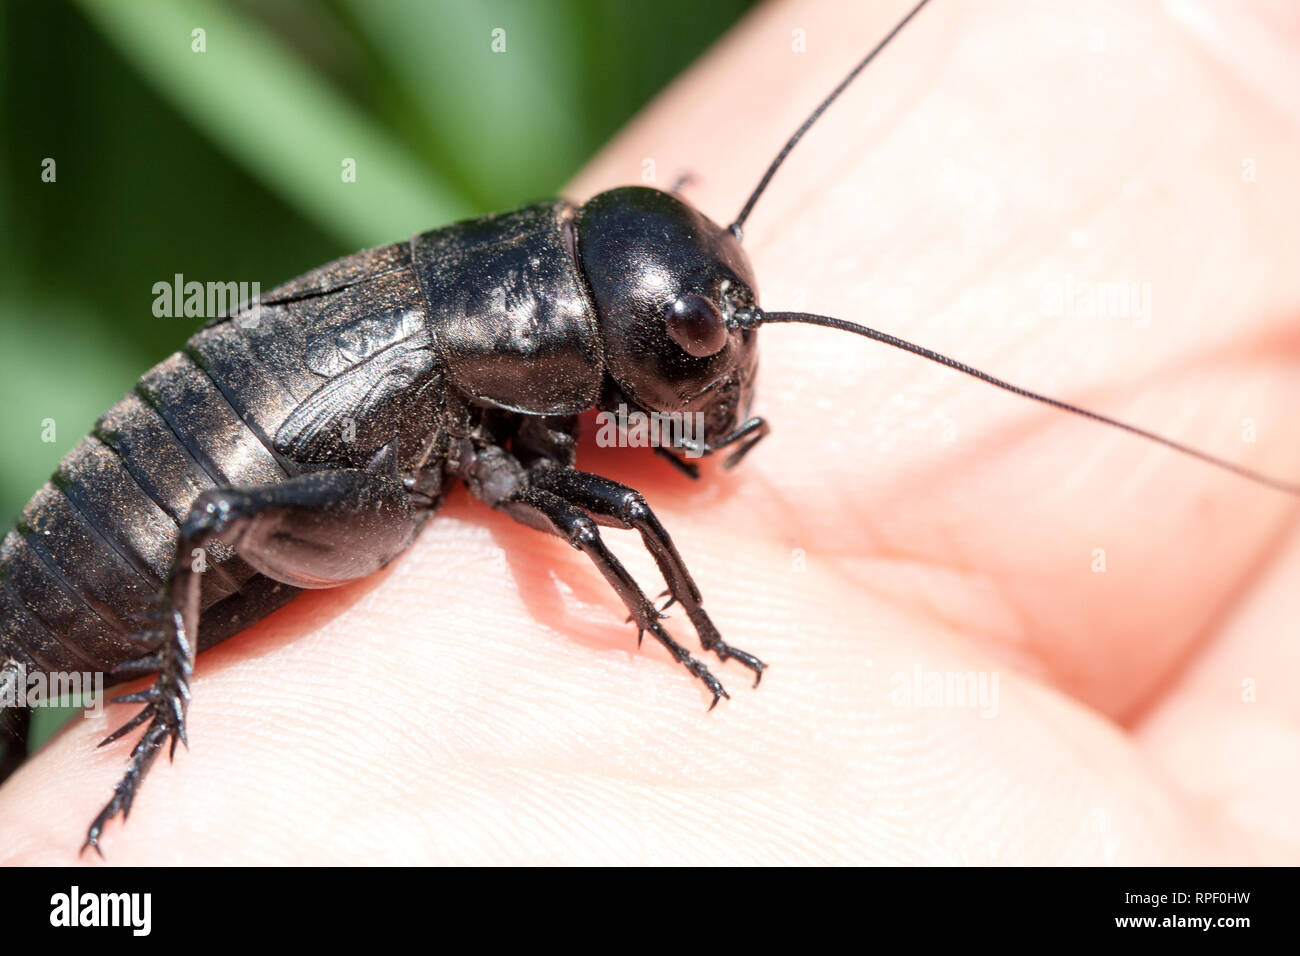 hand holding field cricket outdoors. Gryllus campestris Stock Photo